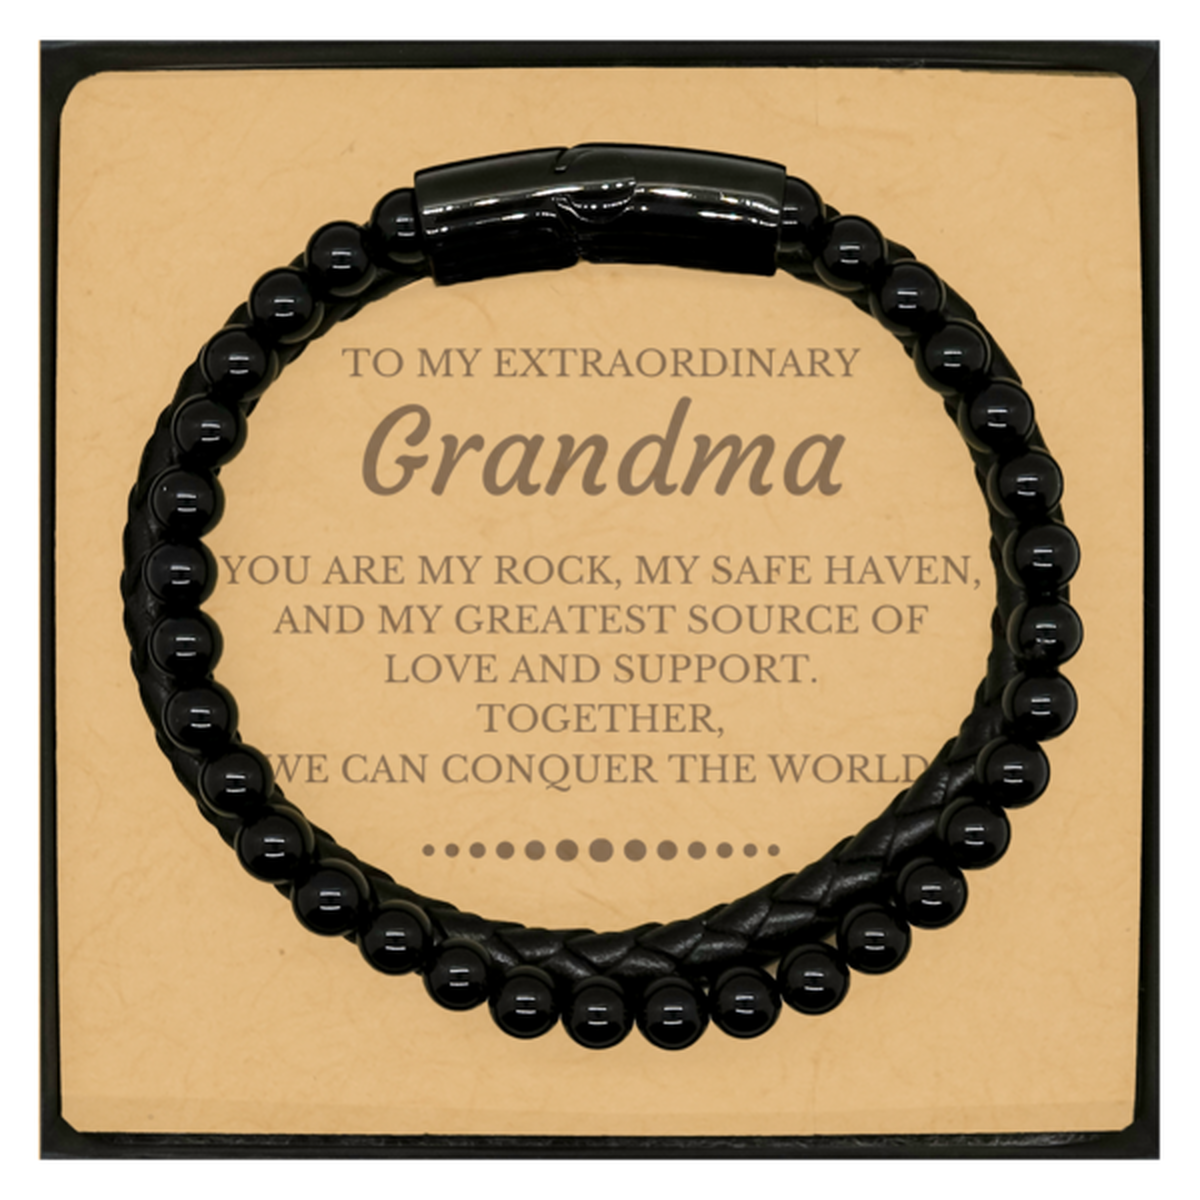 To My Extraordinary Grandma Gifts, Together, we can conquer the world, Birthday Christmas Stone Leather Bracelets For Grandma, Christmas Gifts For Grandma